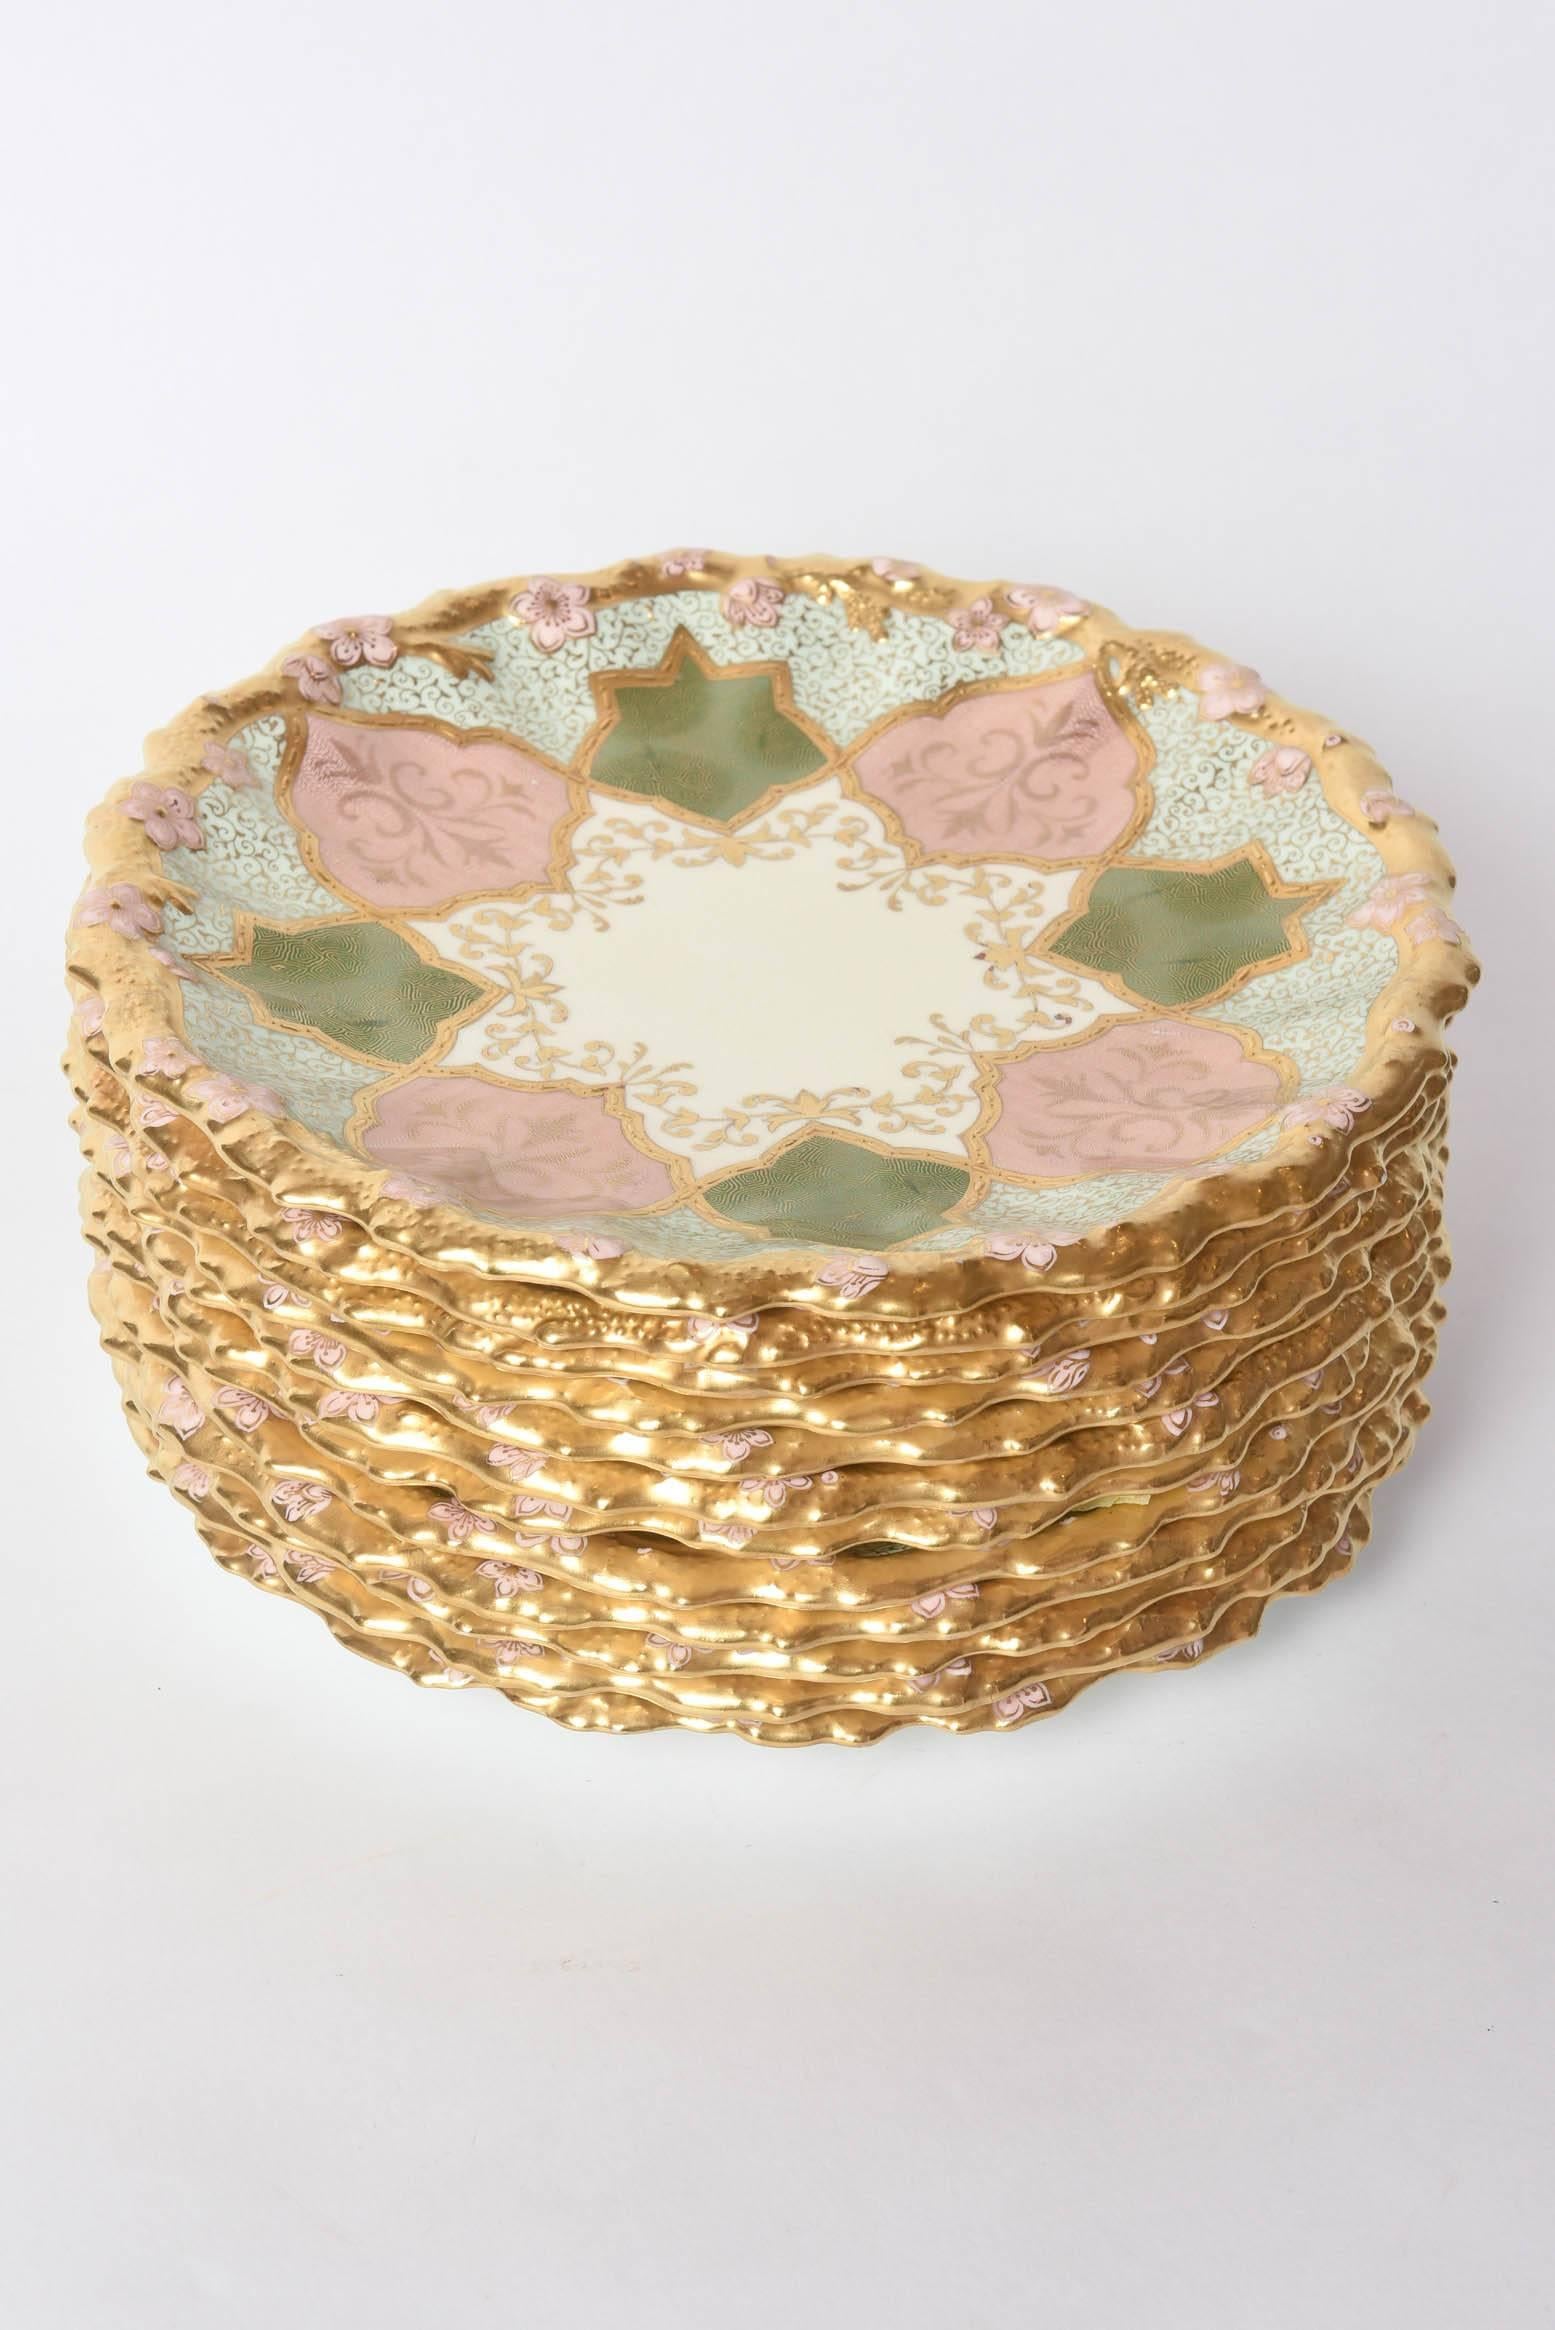 Gold 12 Exquisite and Stunning Plates, Pink and Green, Raised Gilt Encrusted, Scallop